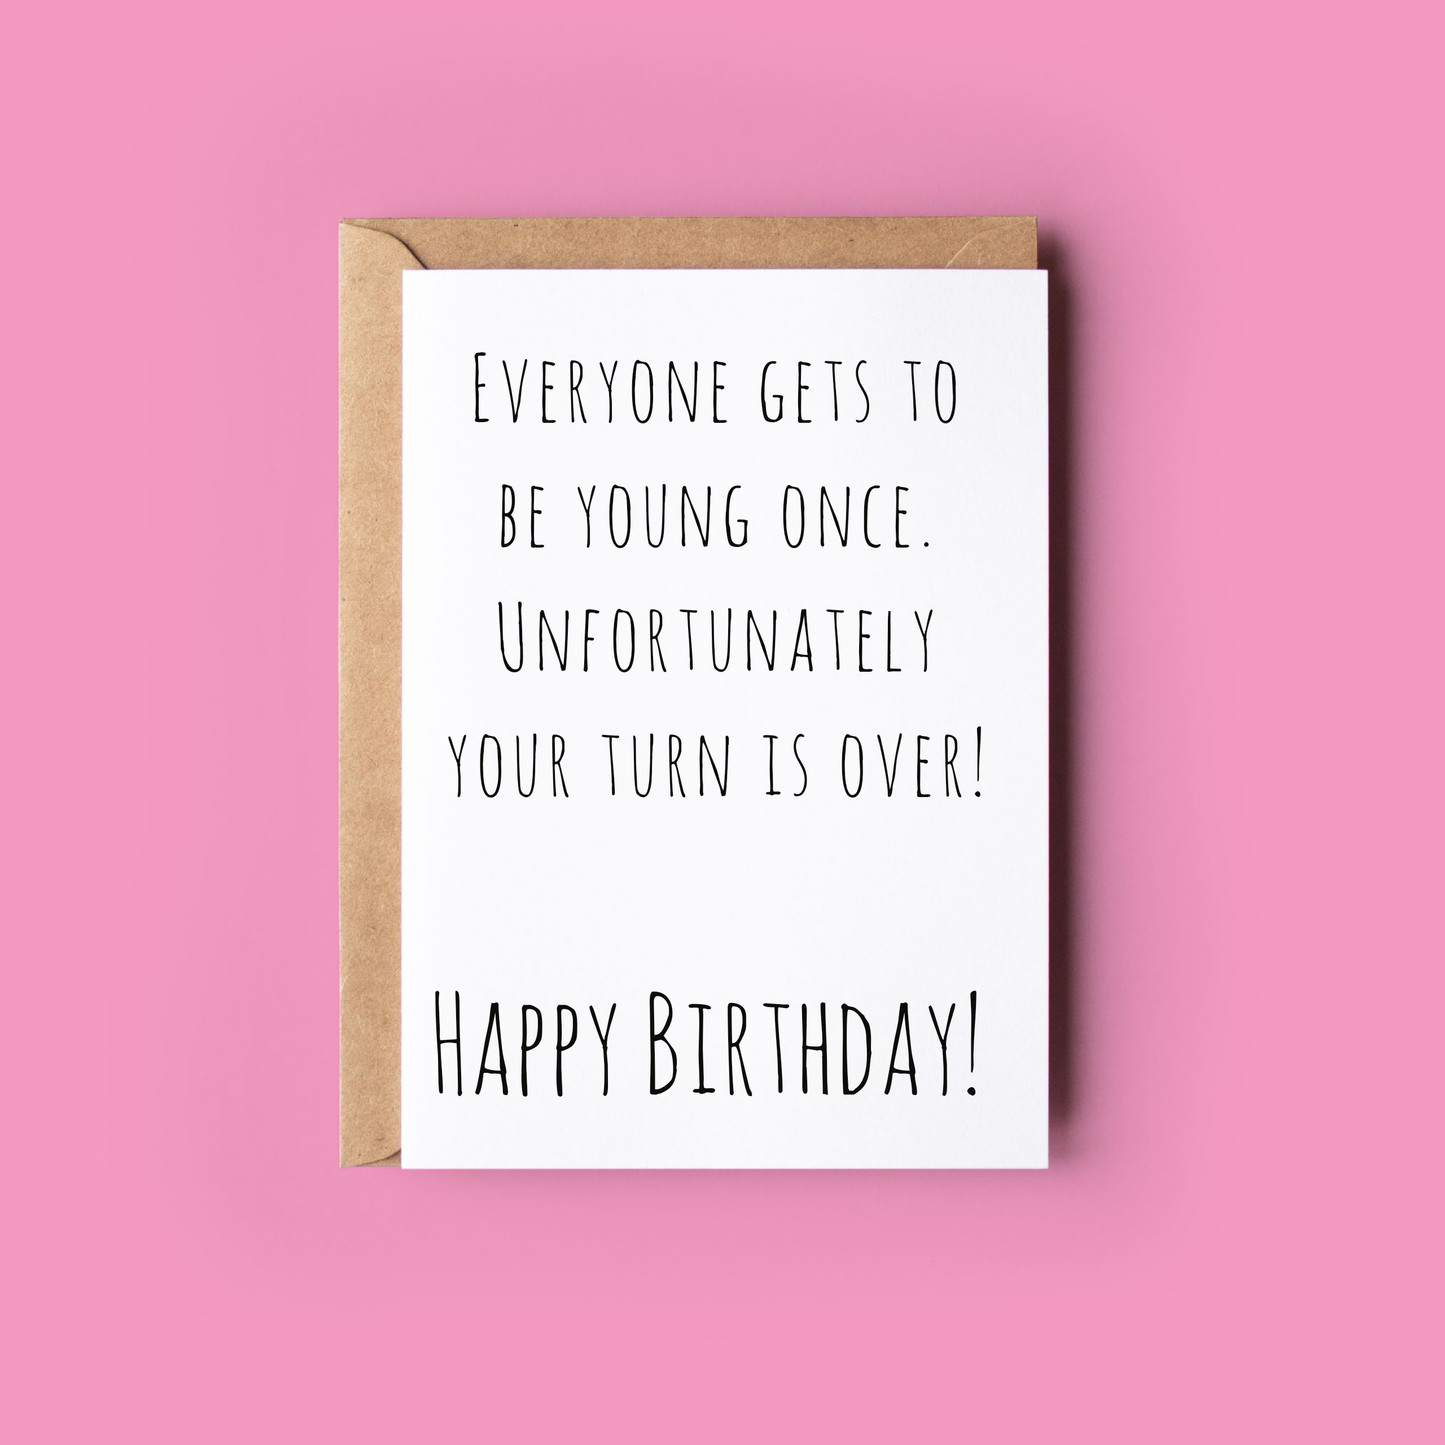 Everyone Gets to be Young Once - Greeting Cards made in Ireland